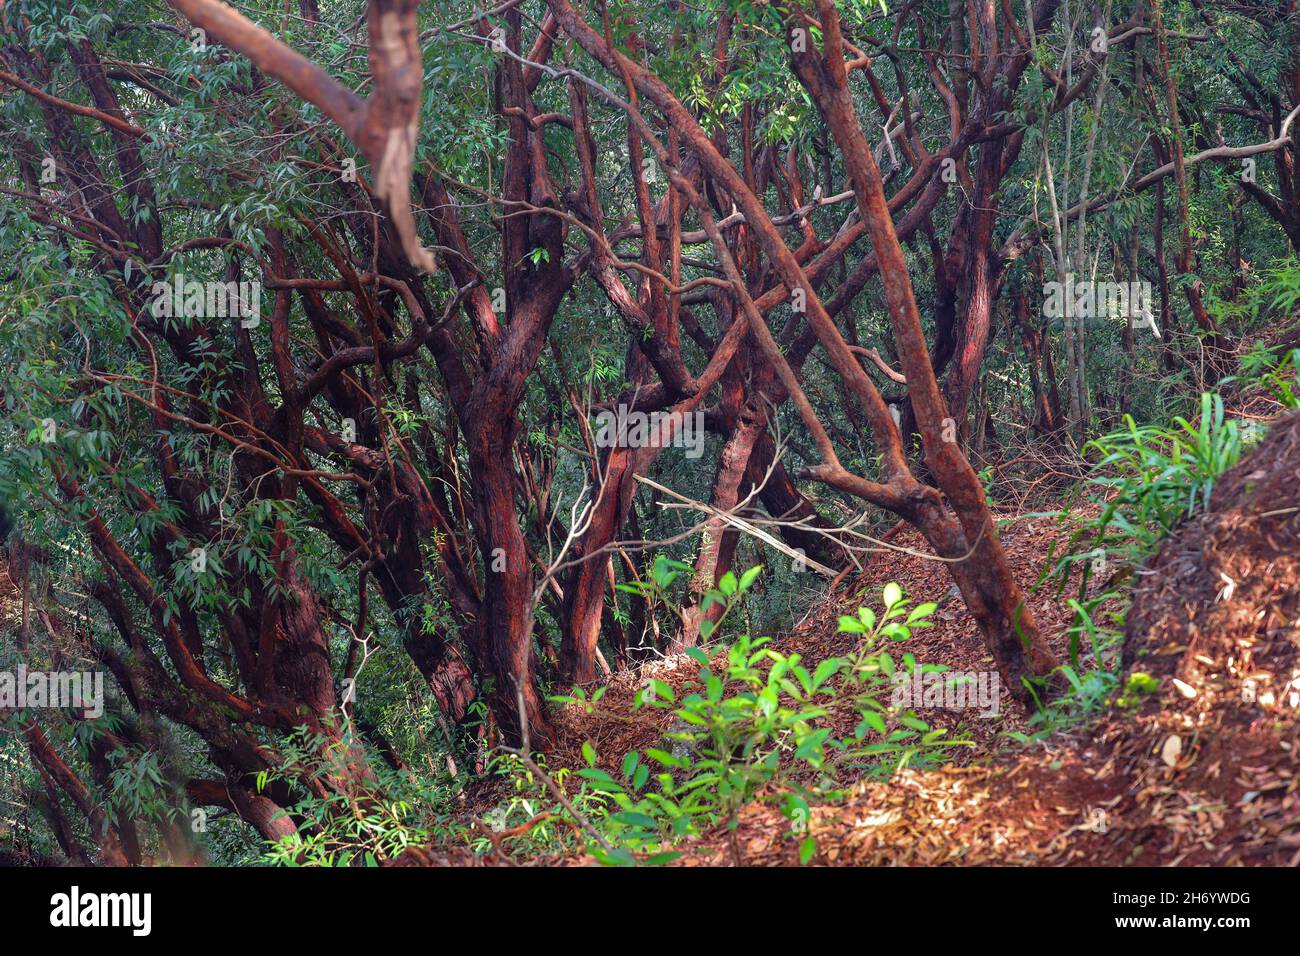 Mythical looking red tree in the myrtle family Myrtaceae in a montane forest in Malaysia Stock Photo